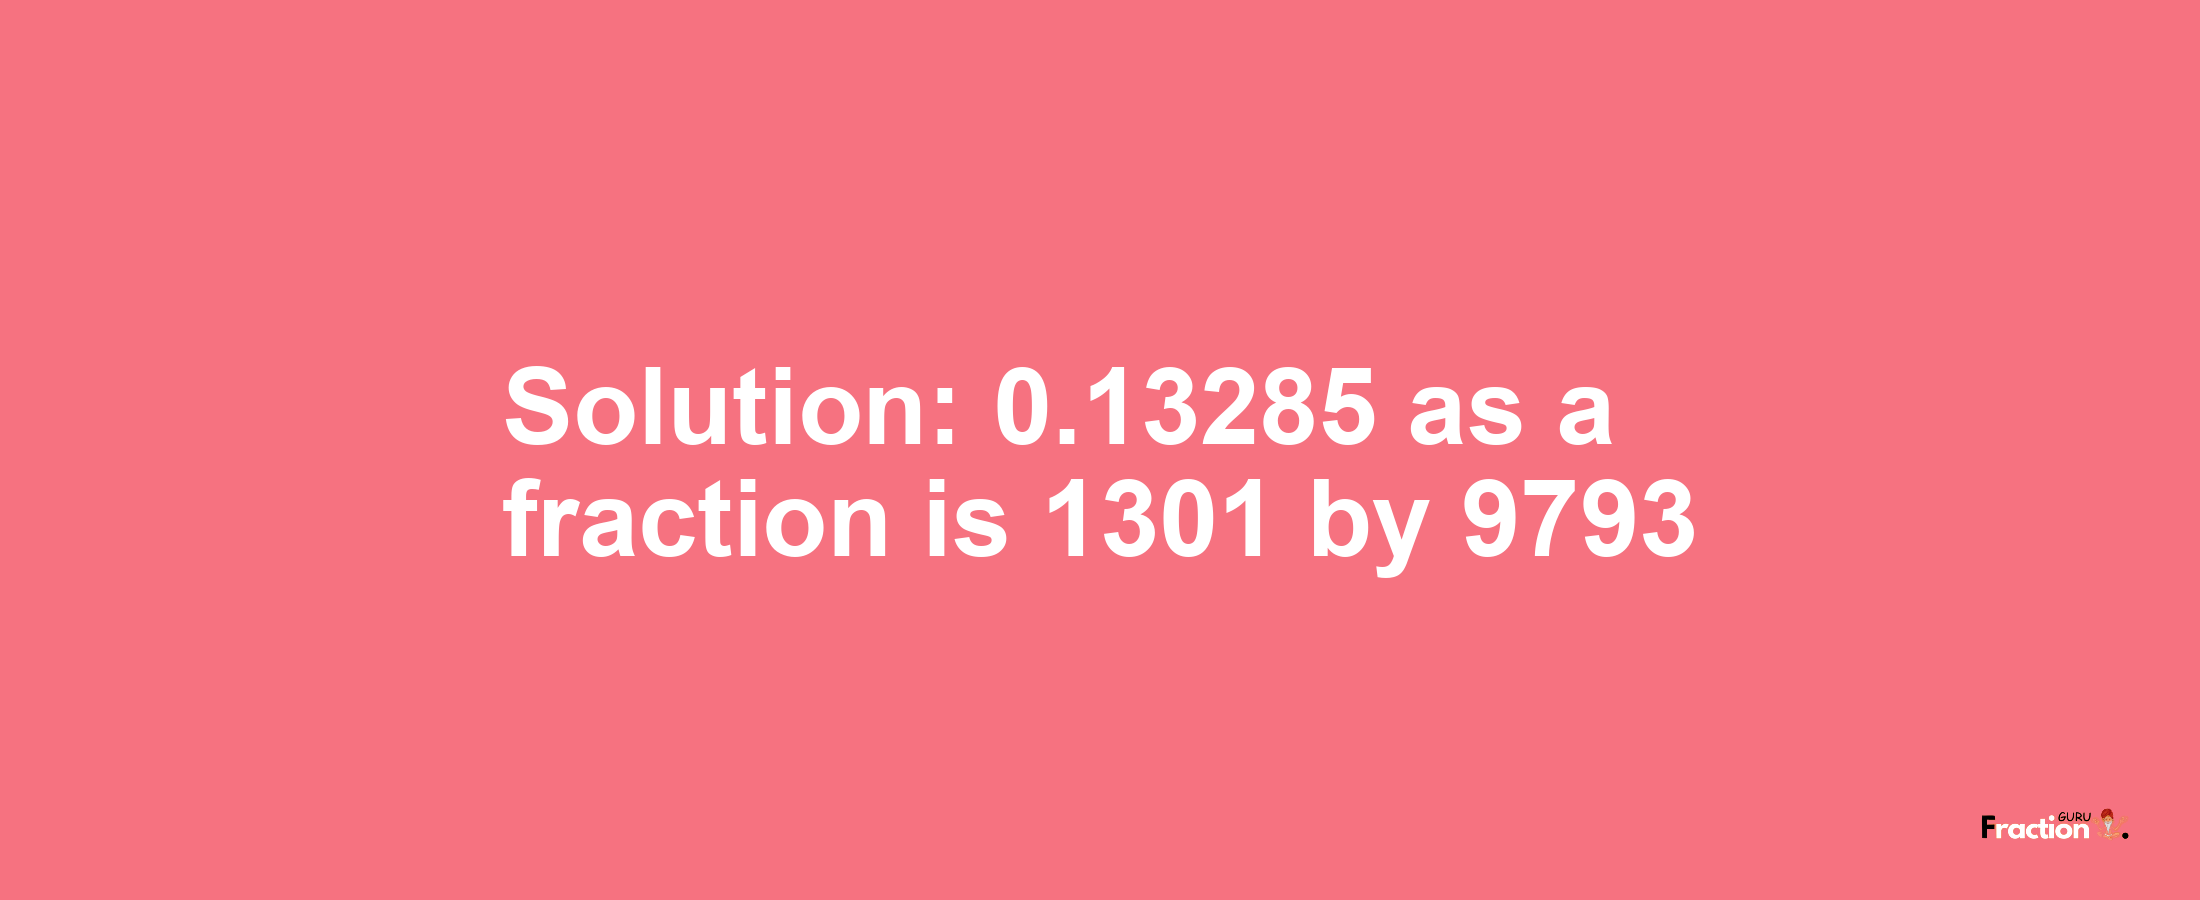 Solution:0.13285 as a fraction is 1301/9793